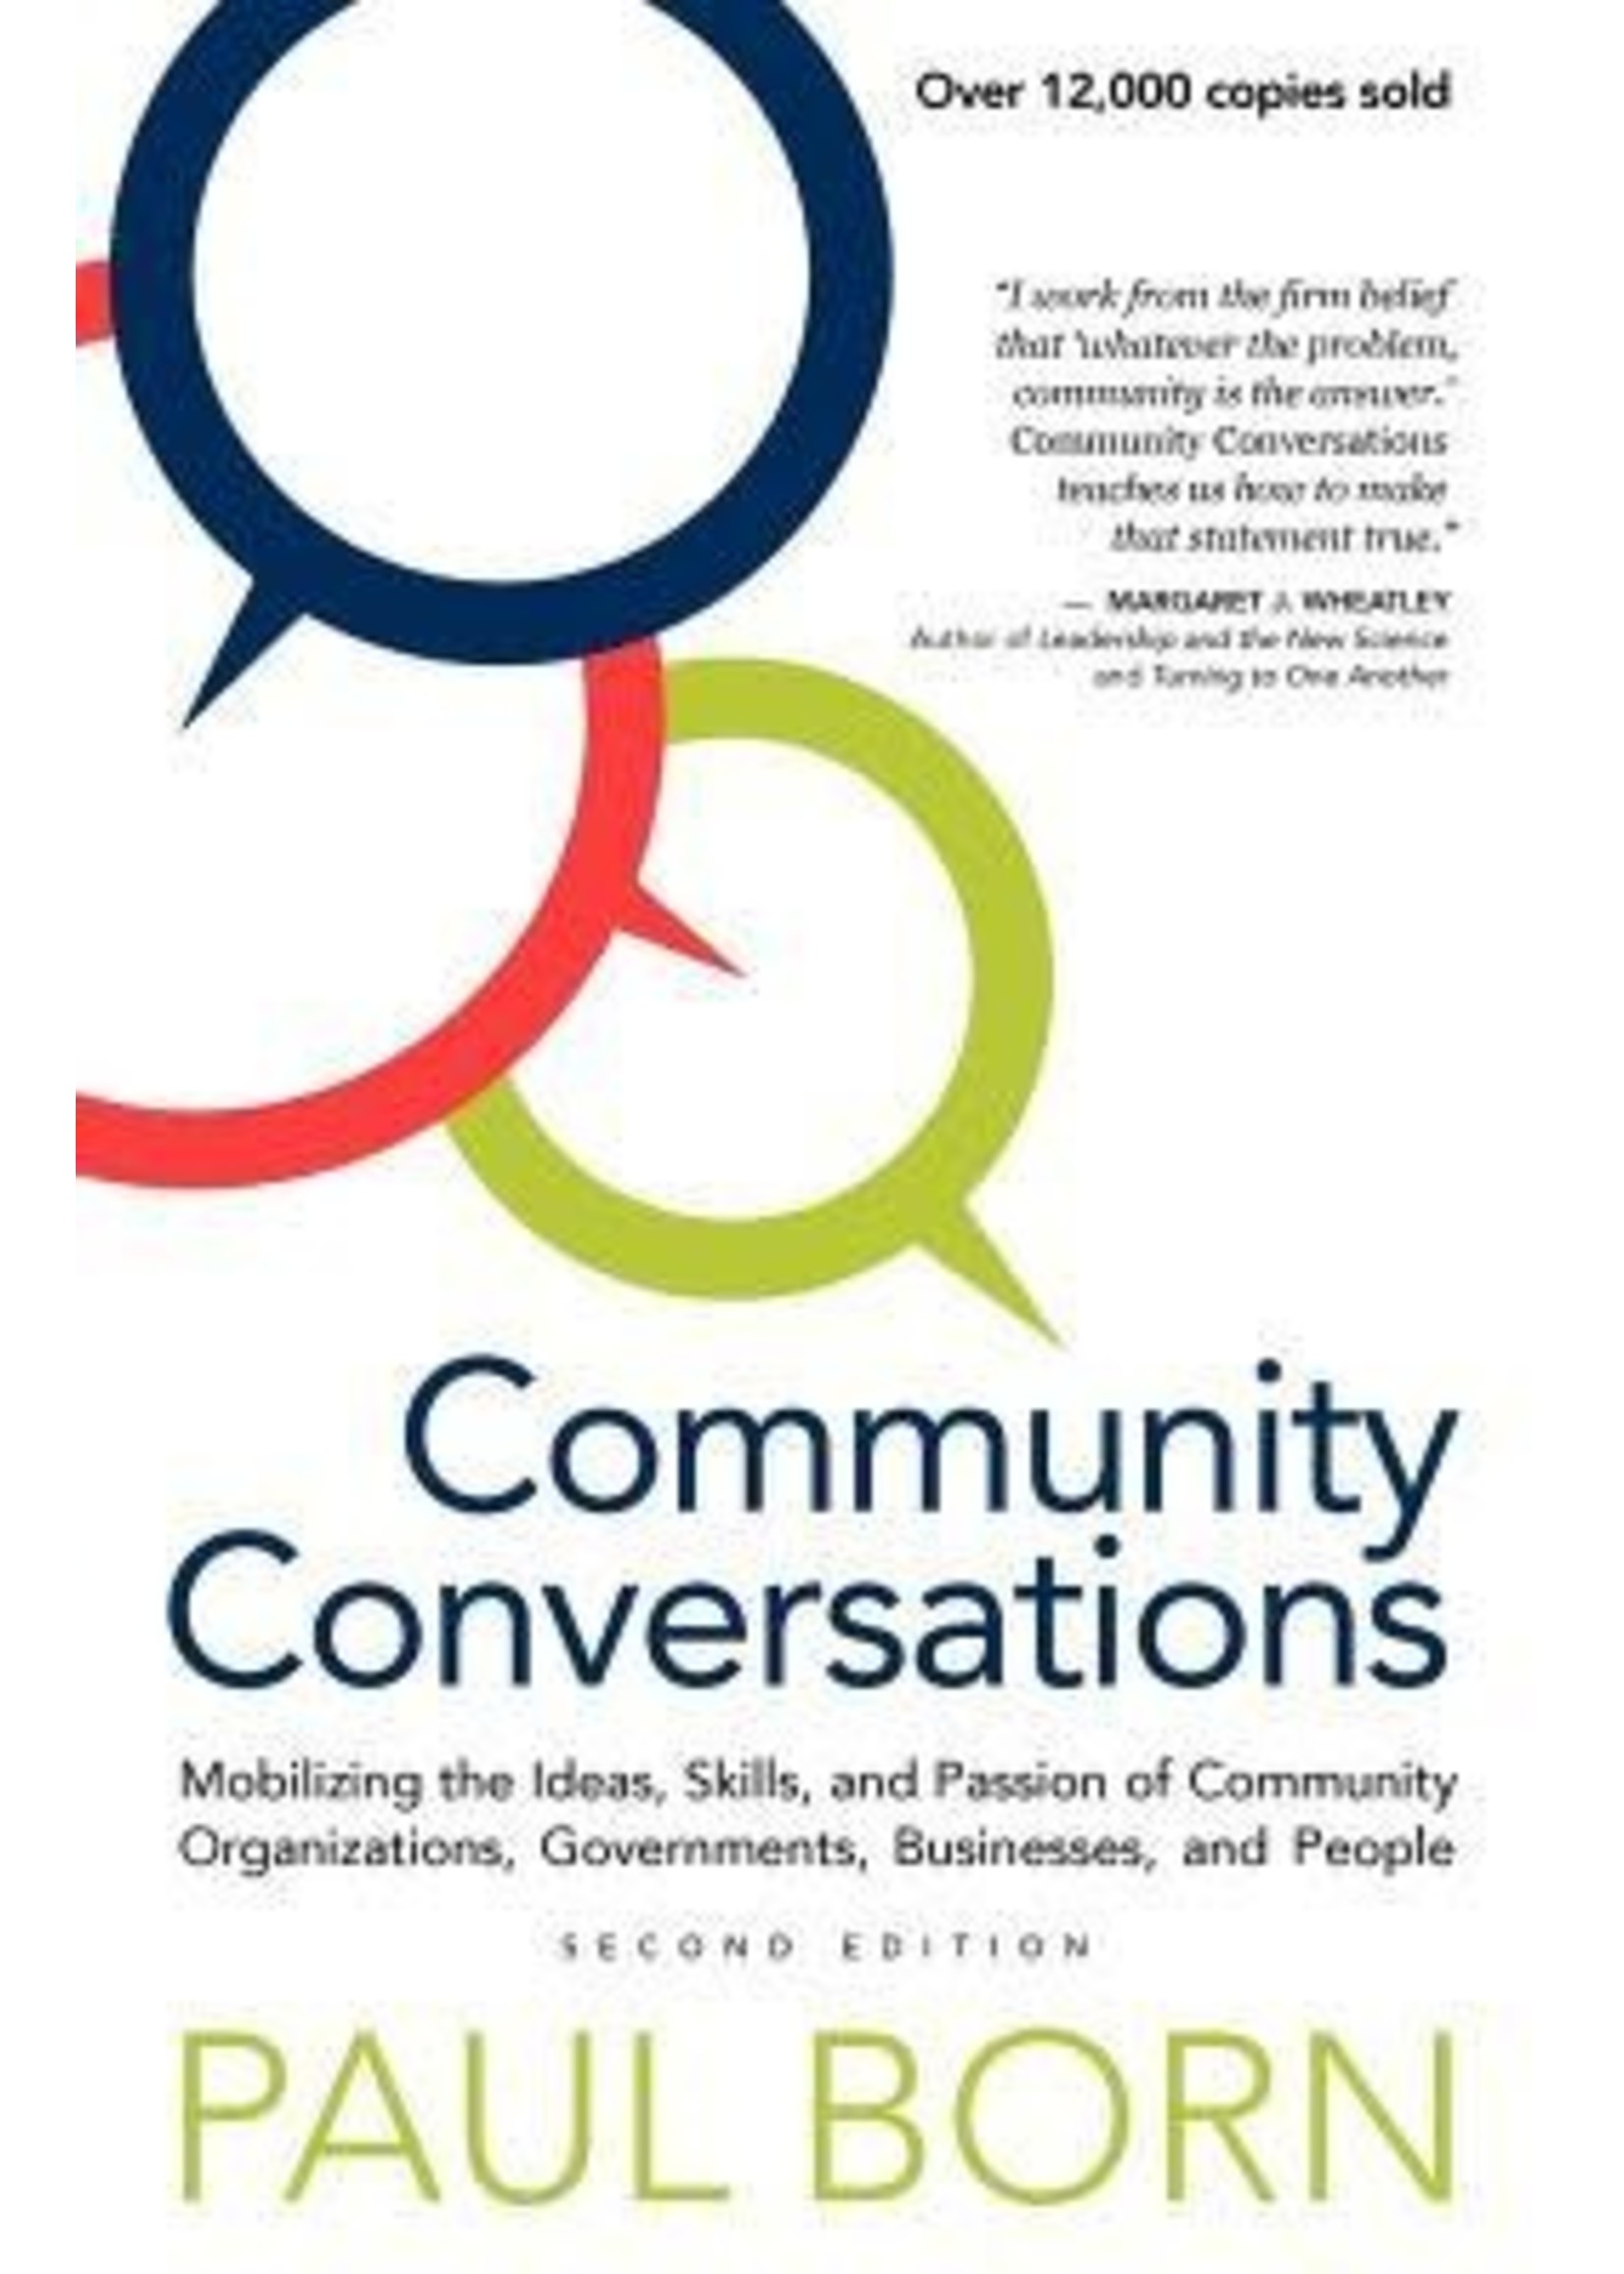 Community Conversations: Mobilizing the Ideas, Skills, and Passion of Community Organizations, Governments, Businesses, and People by Paul Born